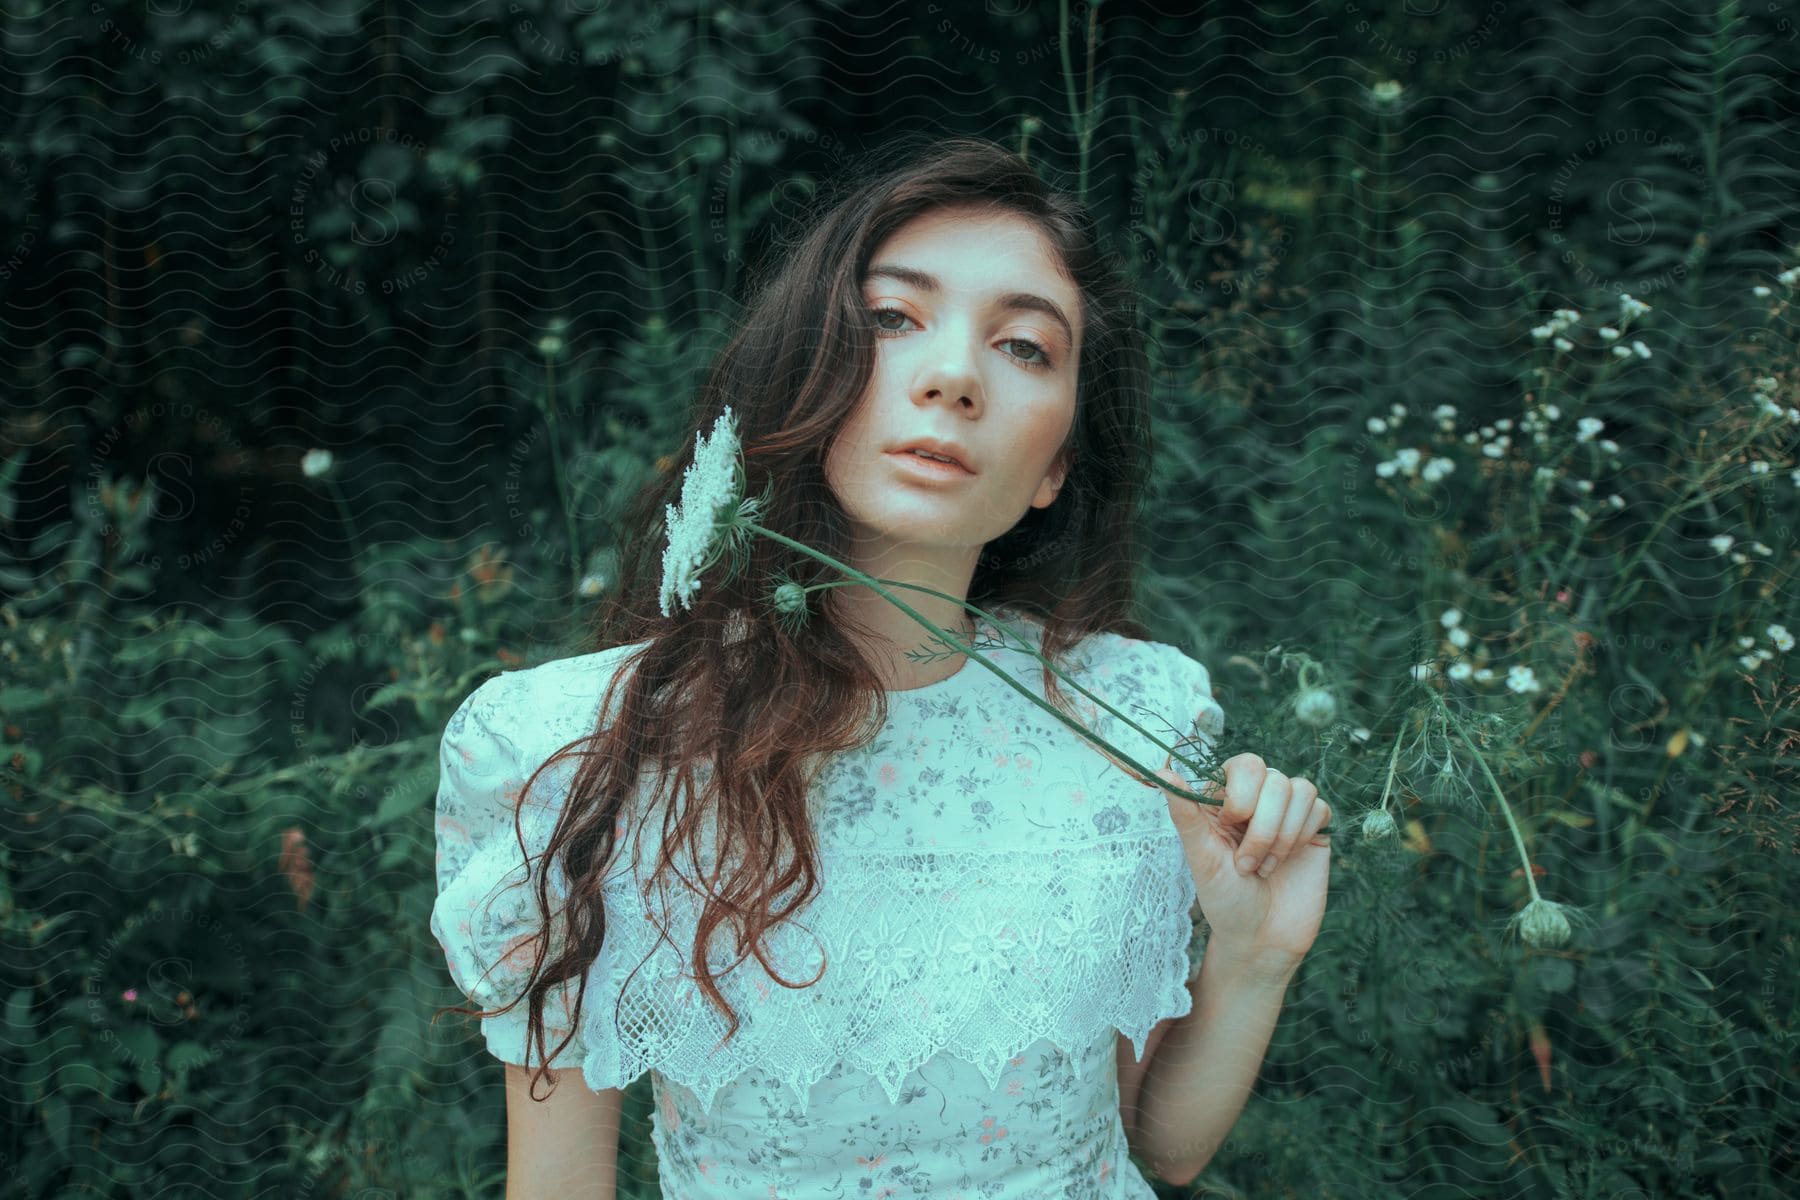 Woman standing amidst dense greenery, holding a white wildflower near her face,with a vintage-style floral dress with lace detailing, and her long, wavy hair cascades over her shoulders.